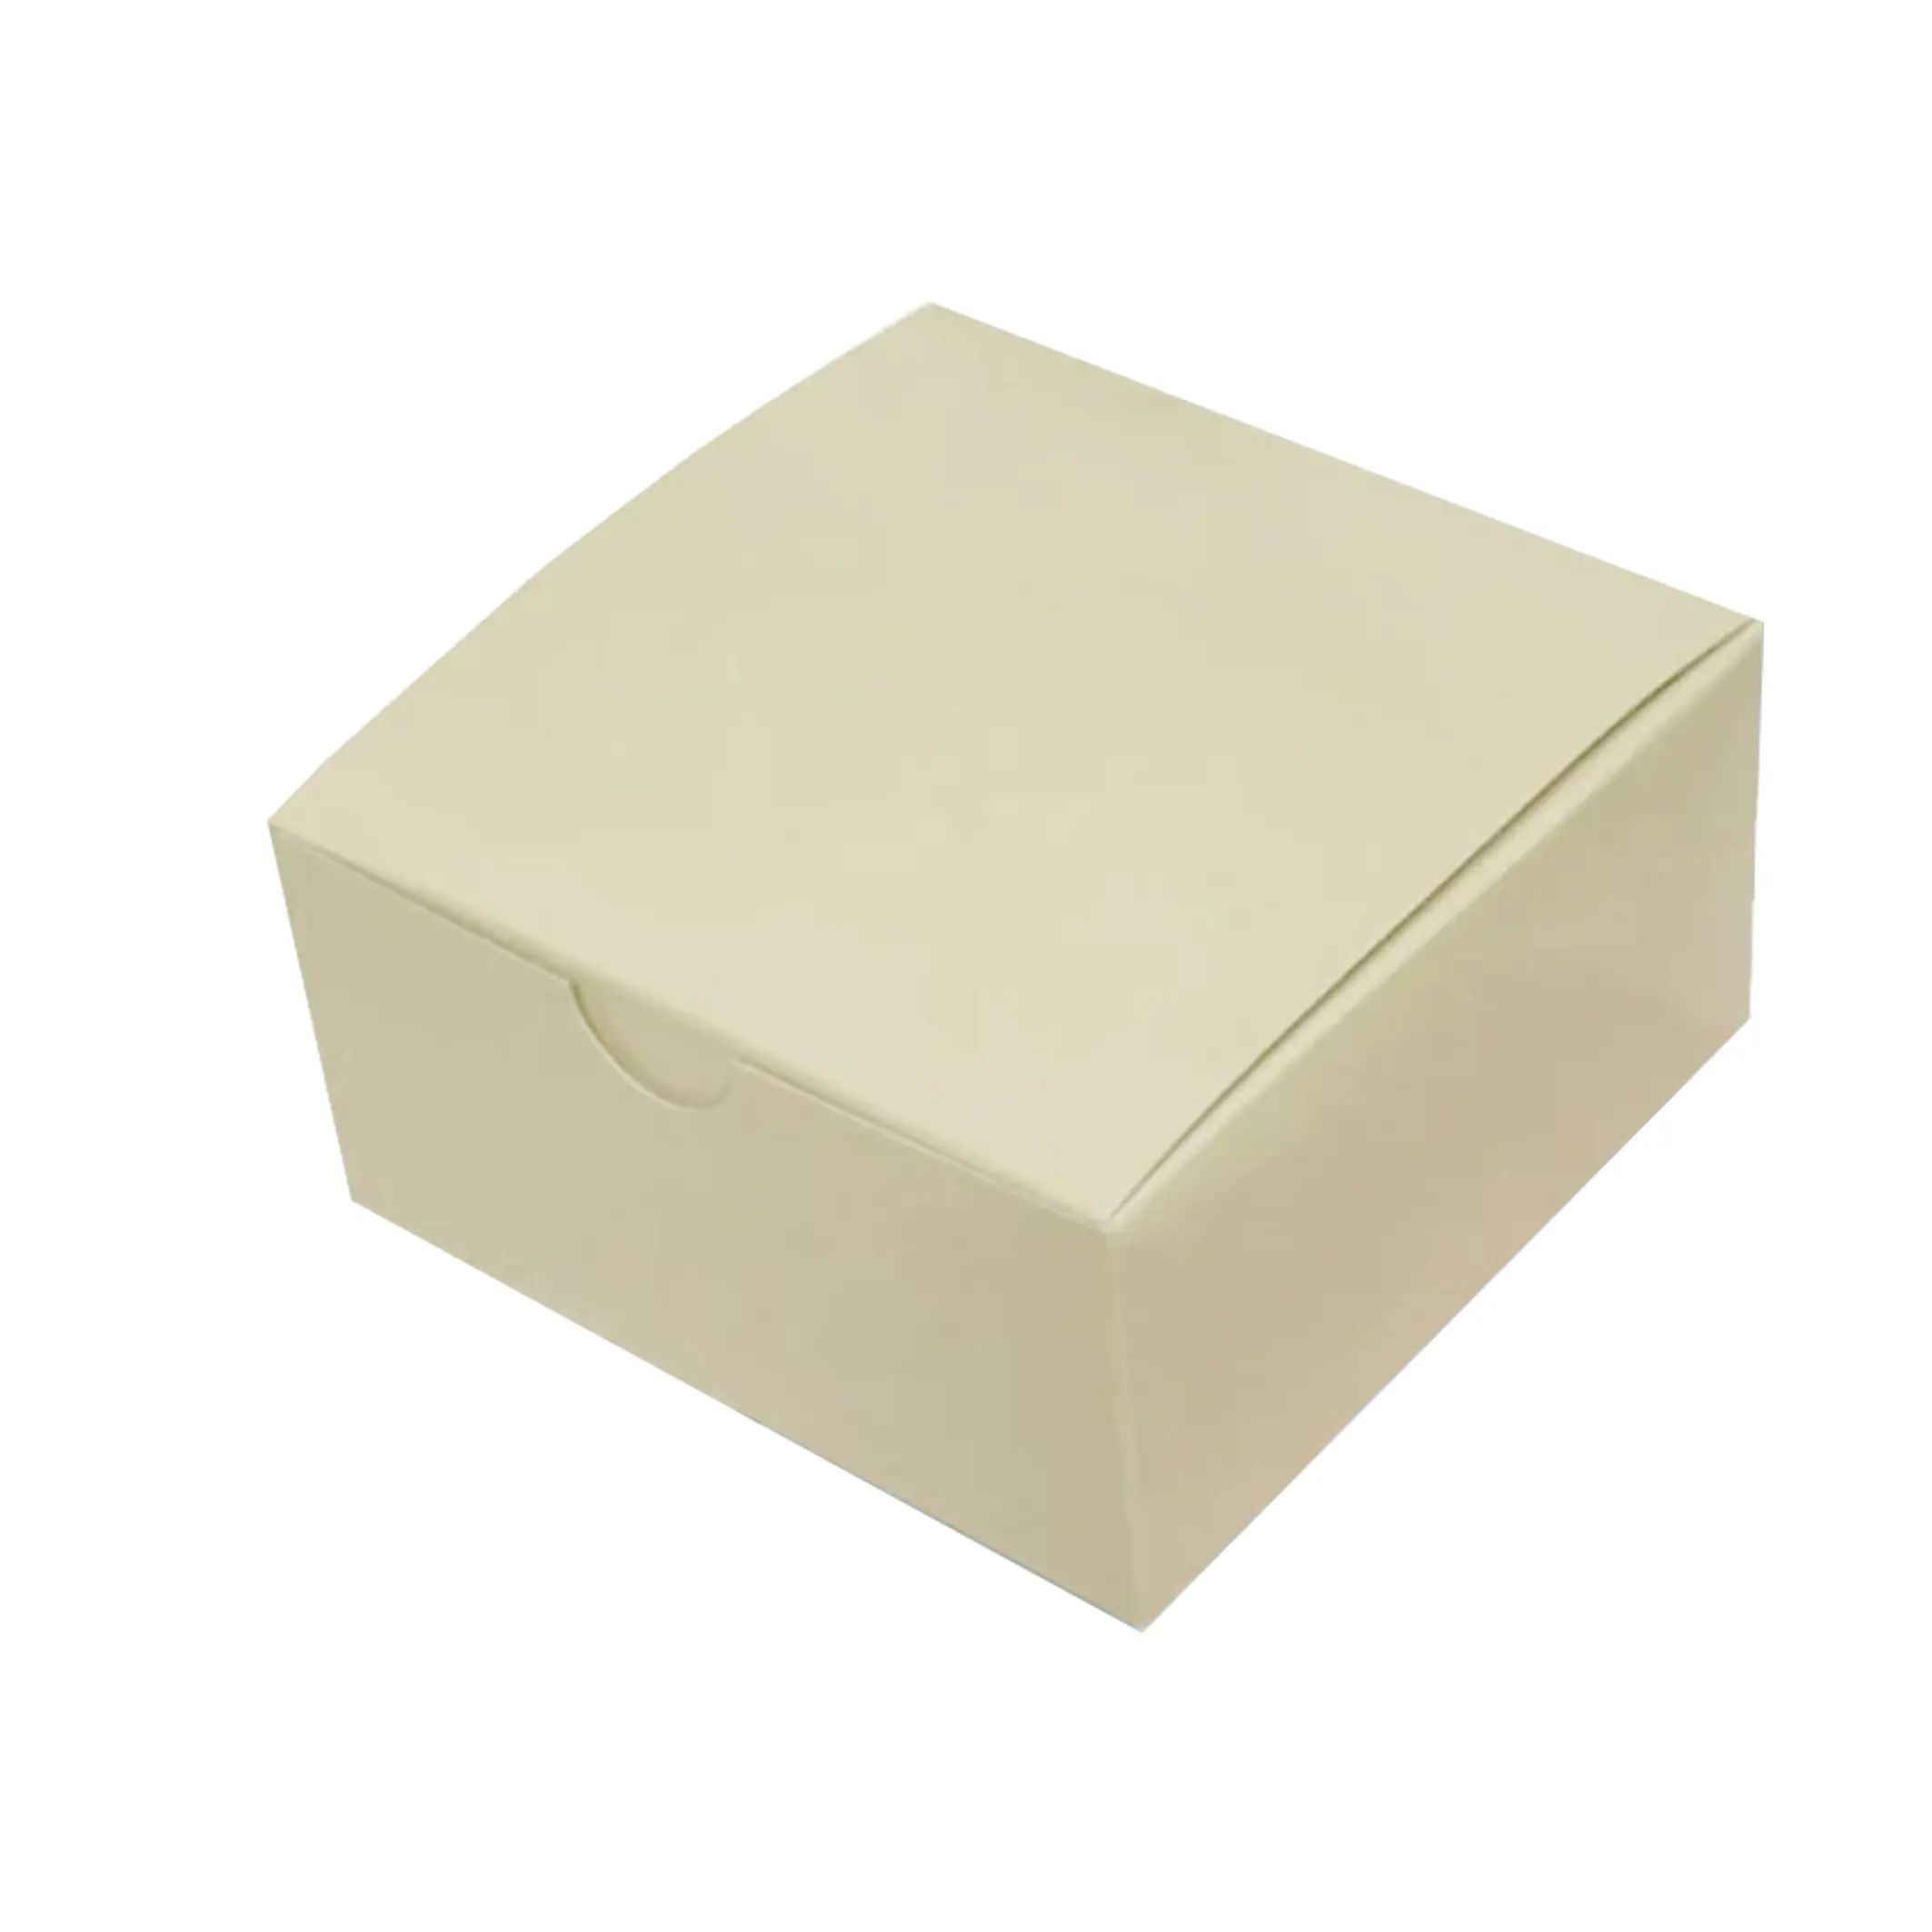 Ivory Packaging Food & Beverage Packaging Favor Boxes Mini Cake BoxesでBulk 12 Inch Cake